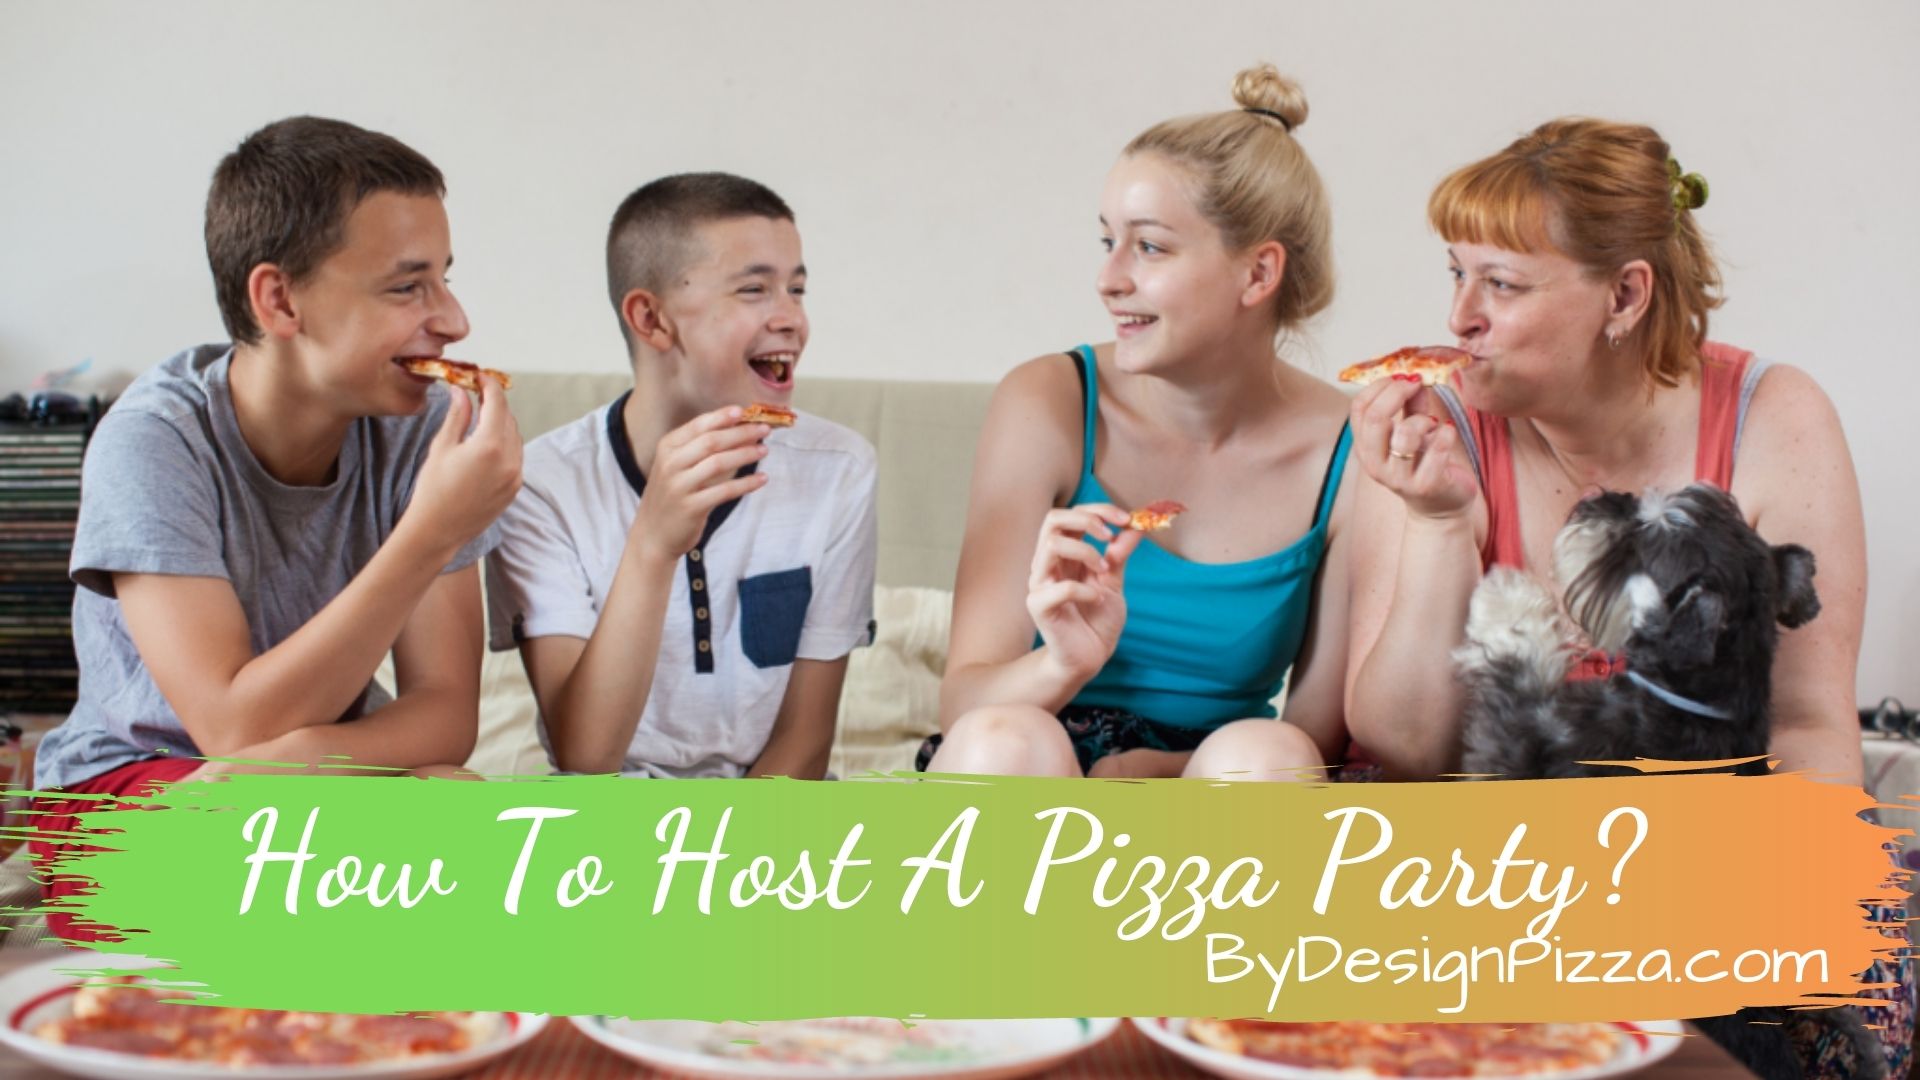 How To Host A Pizza Party?